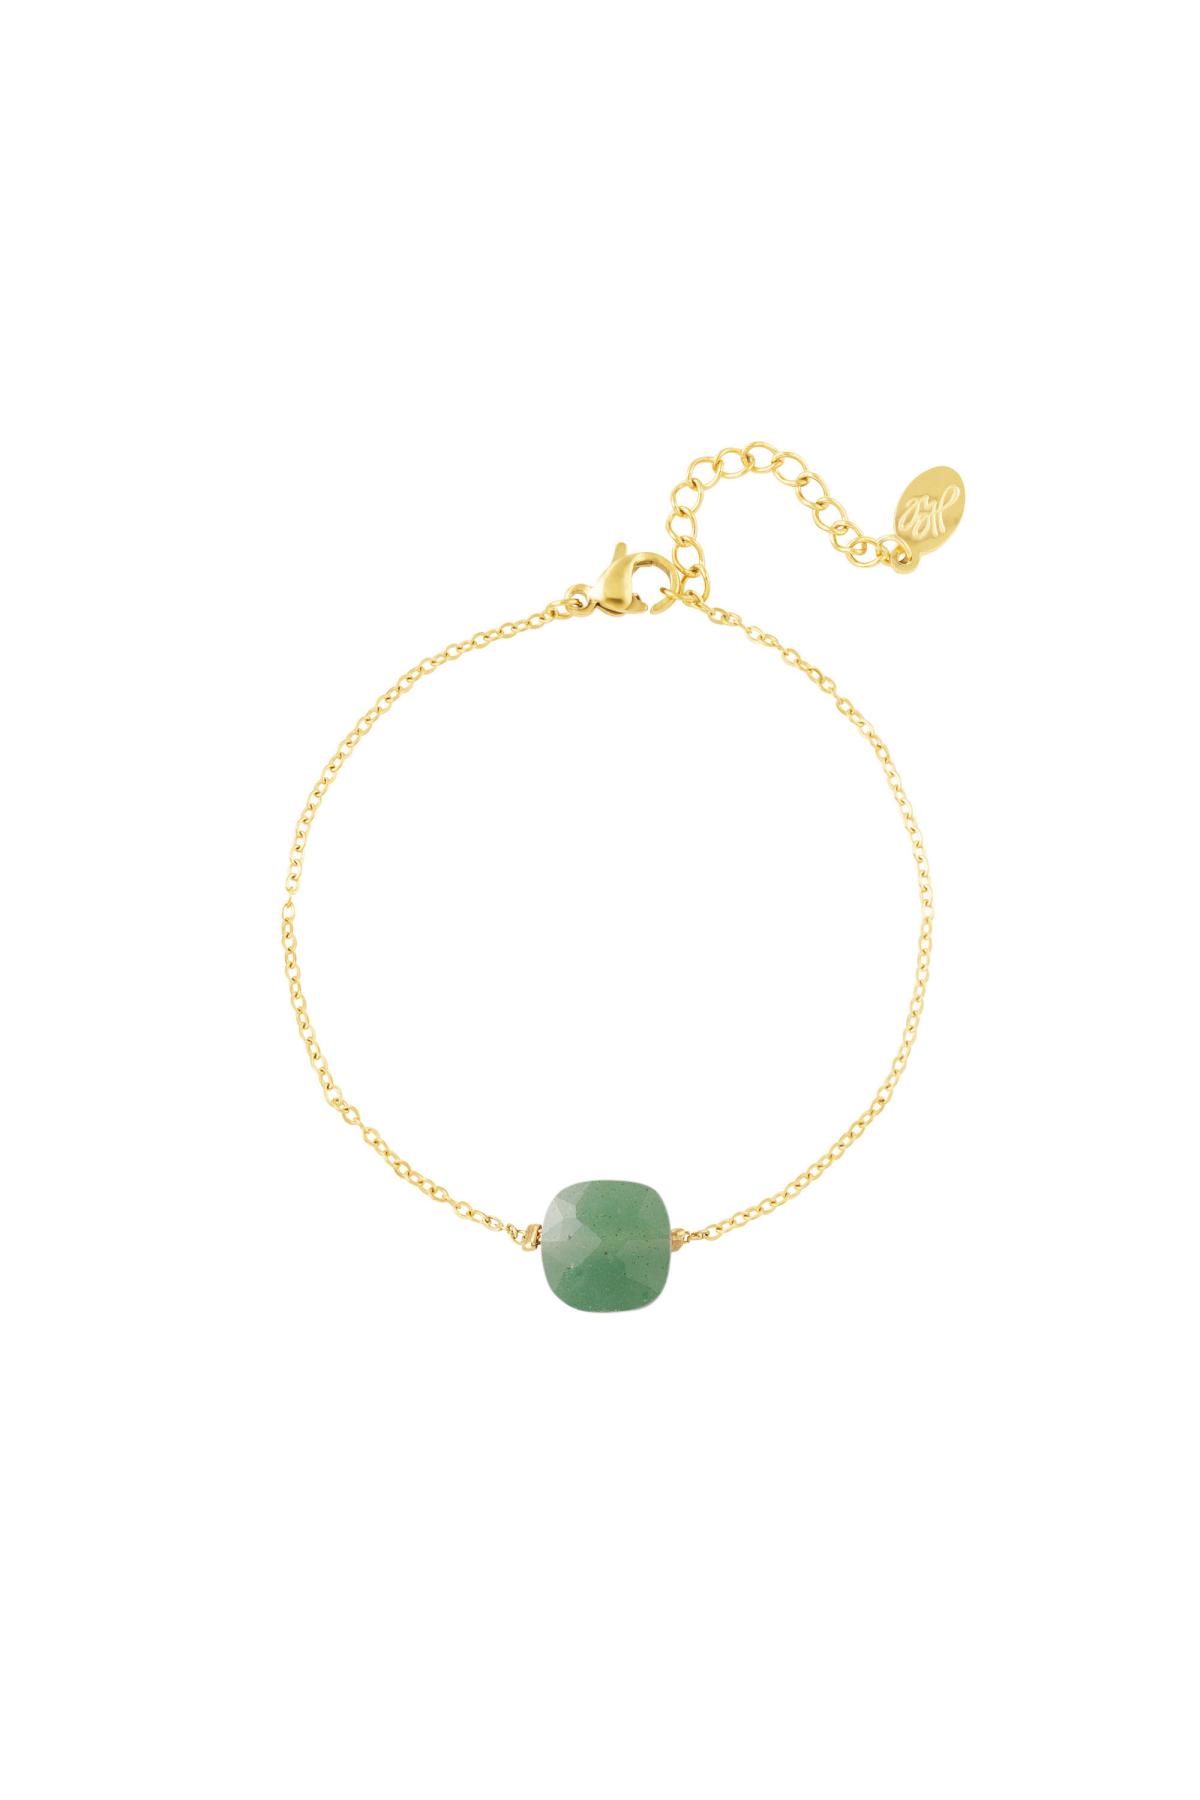 Bracelet with stone - Natural stones collection Green &amp; Gold Stainless Steel